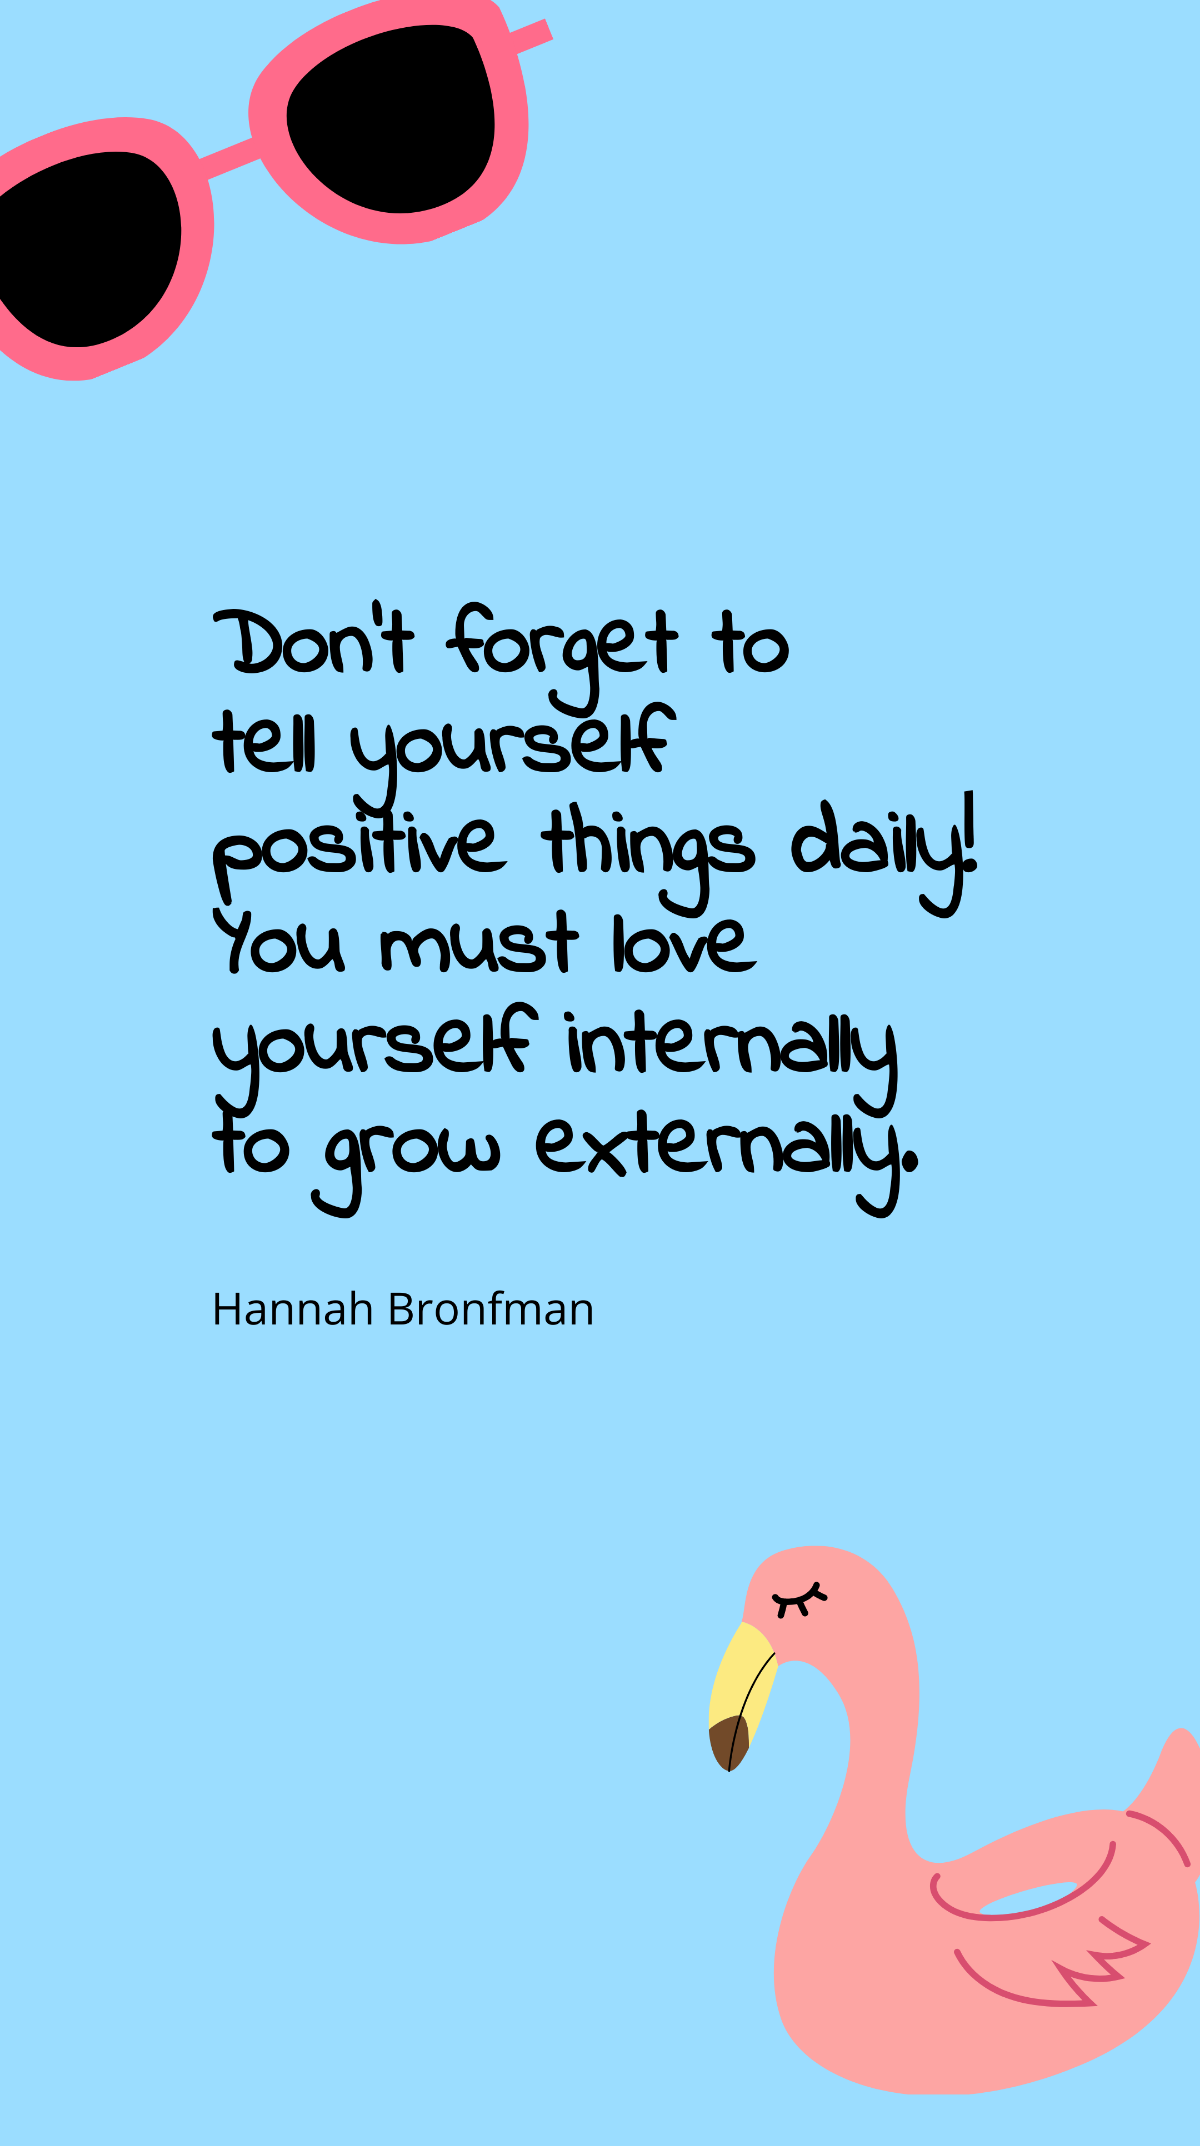 Hannah Bronfman - Don’t forget to tell yourself positive things daily! You must love yourself internally to grow externally. Template